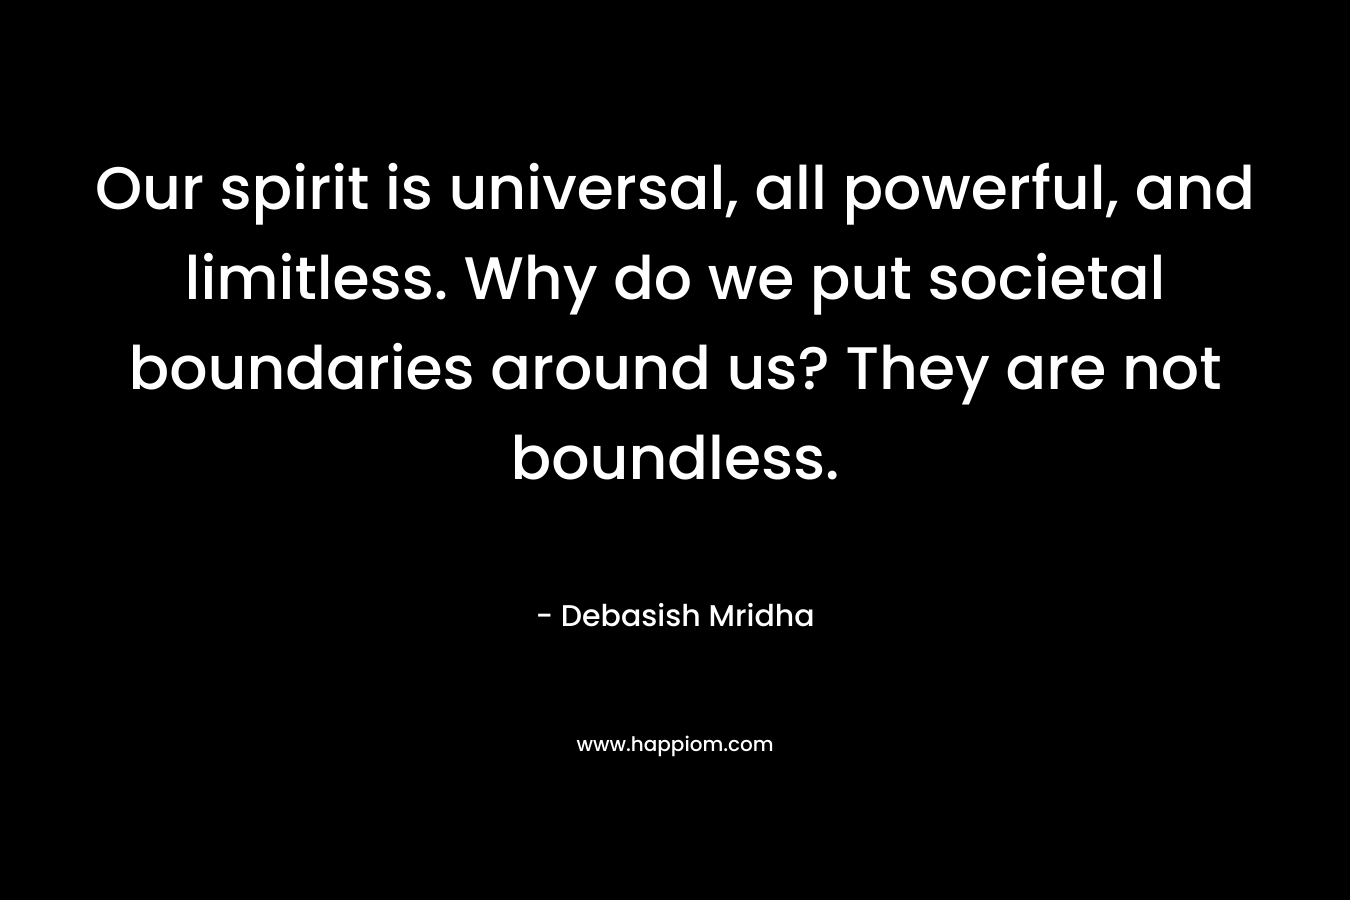 Our spirit is universal, all powerful, and limitless. Why do we put societal boundaries around us? They are not boundless.